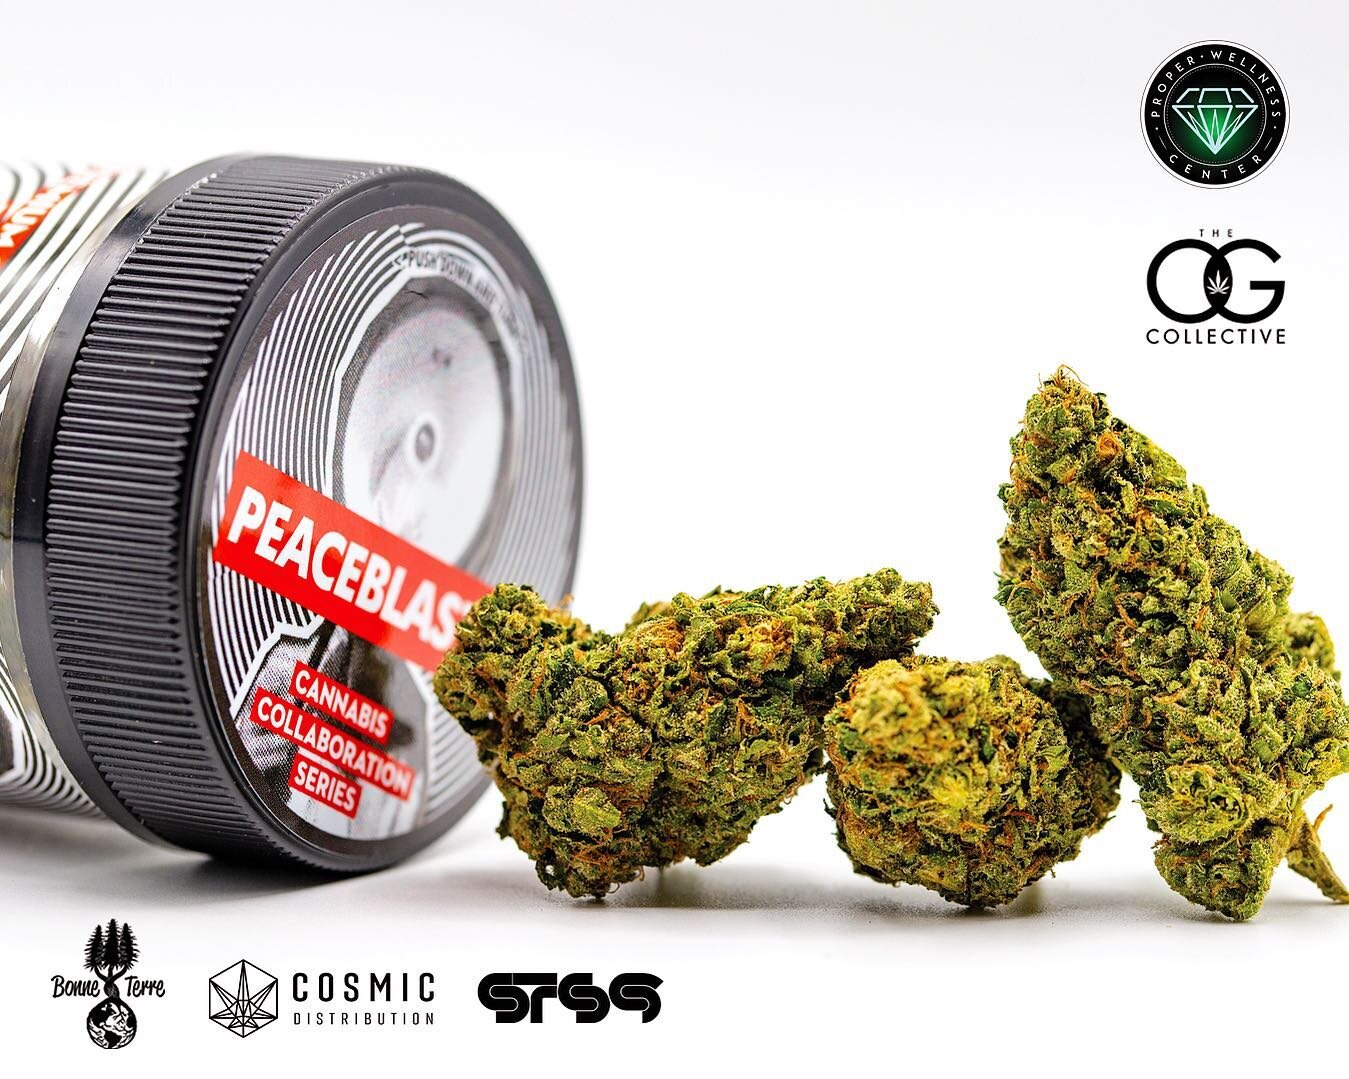 Shop drop alert 🚨 
You can find our Peaceblaster Oscillator OG flower at Proper Wellness in Eureka &amp; Del Rio and @_theogcollective_ in Cathedral City! 

Proper Wellness
517 5th St. 
Eureka, CA, 95501

116 Wildwood Ave. 
Rio Dell, CA, 95562

The 